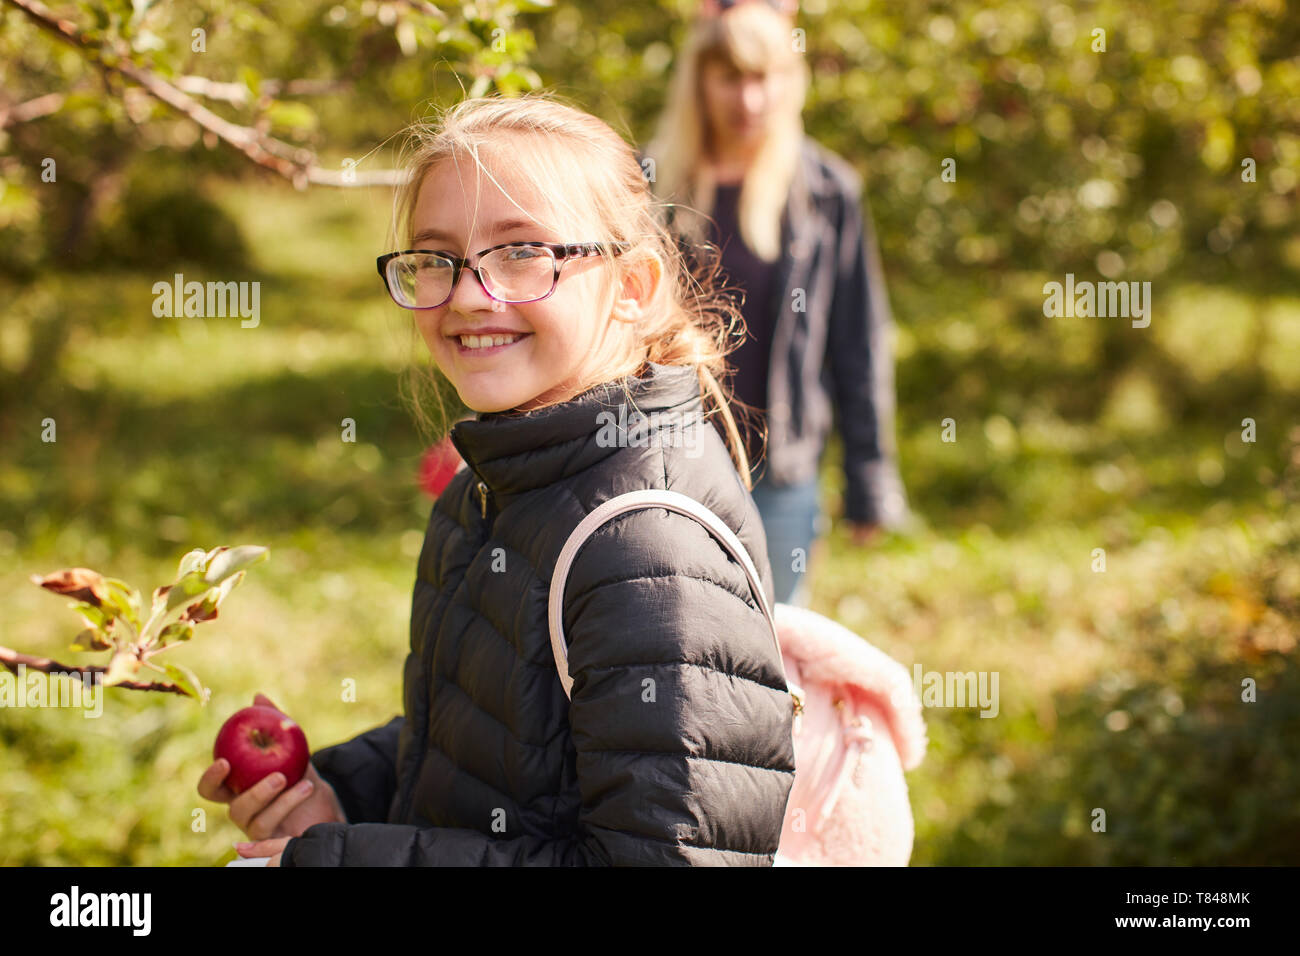 Girl picking apples from tree Stock Photo